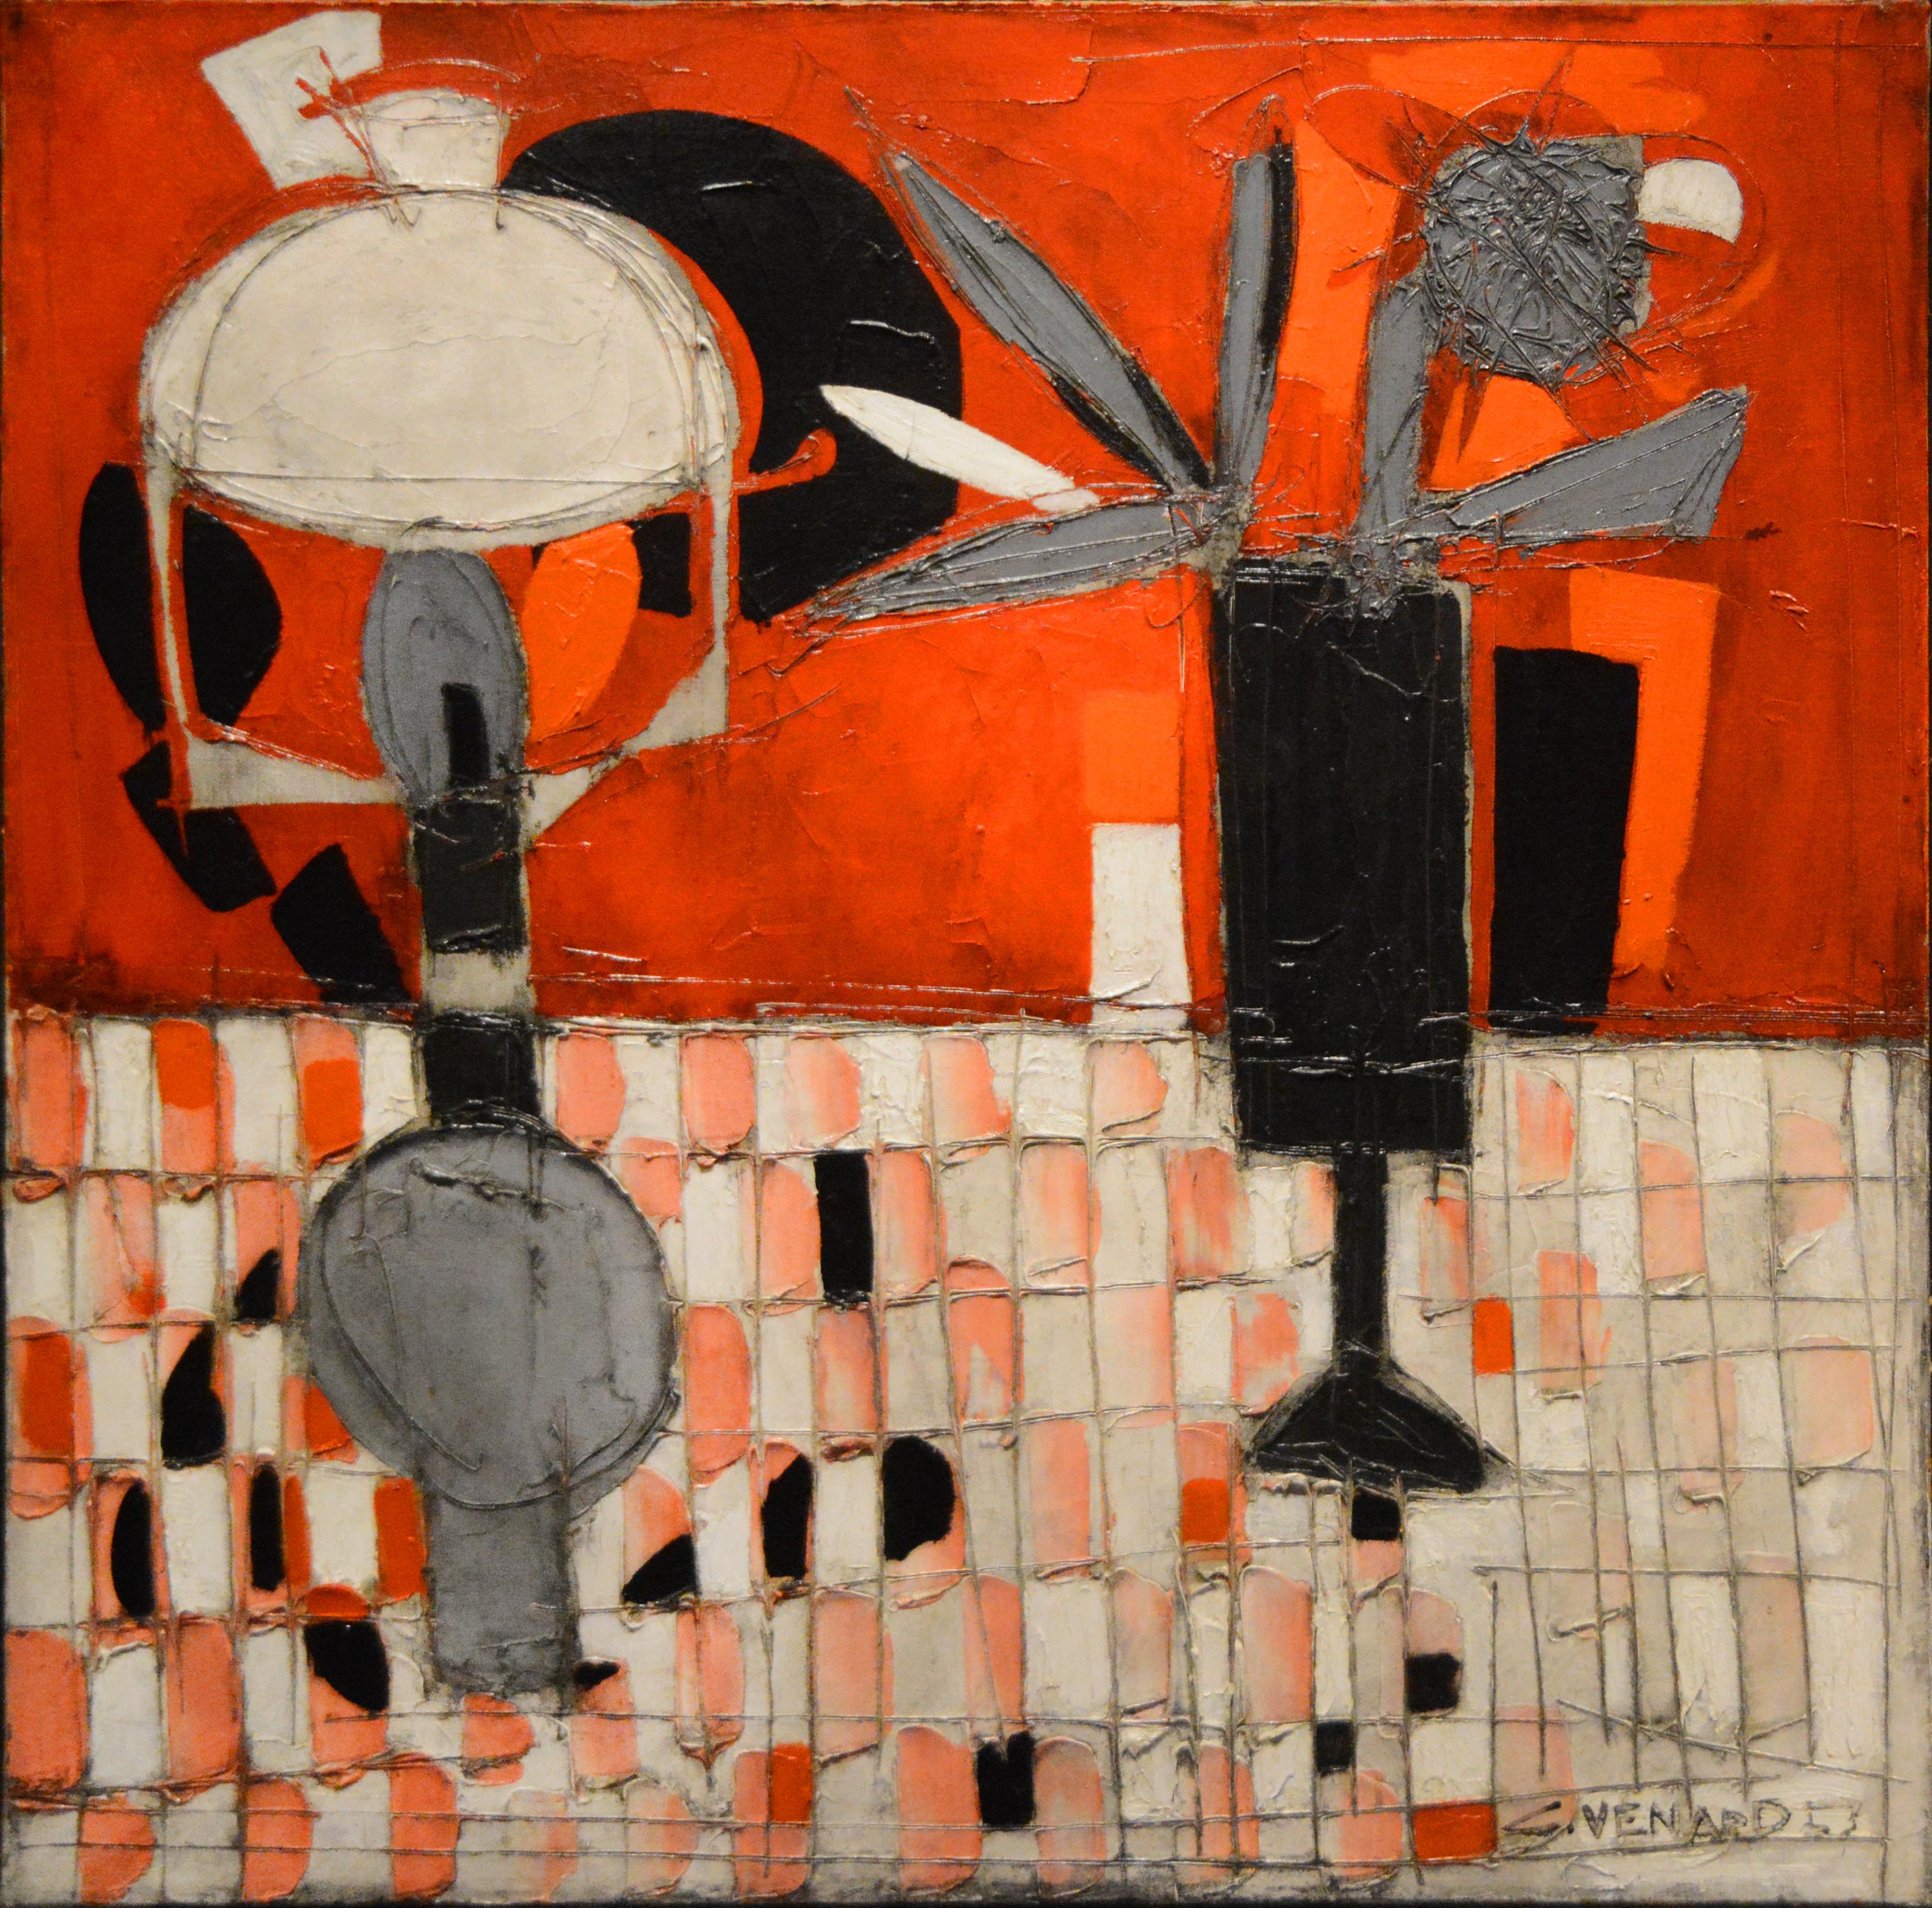 Abstract Painting Claude Vénard - Nature morte en rouge et noir (La nature morte en rouge et noir), 1953